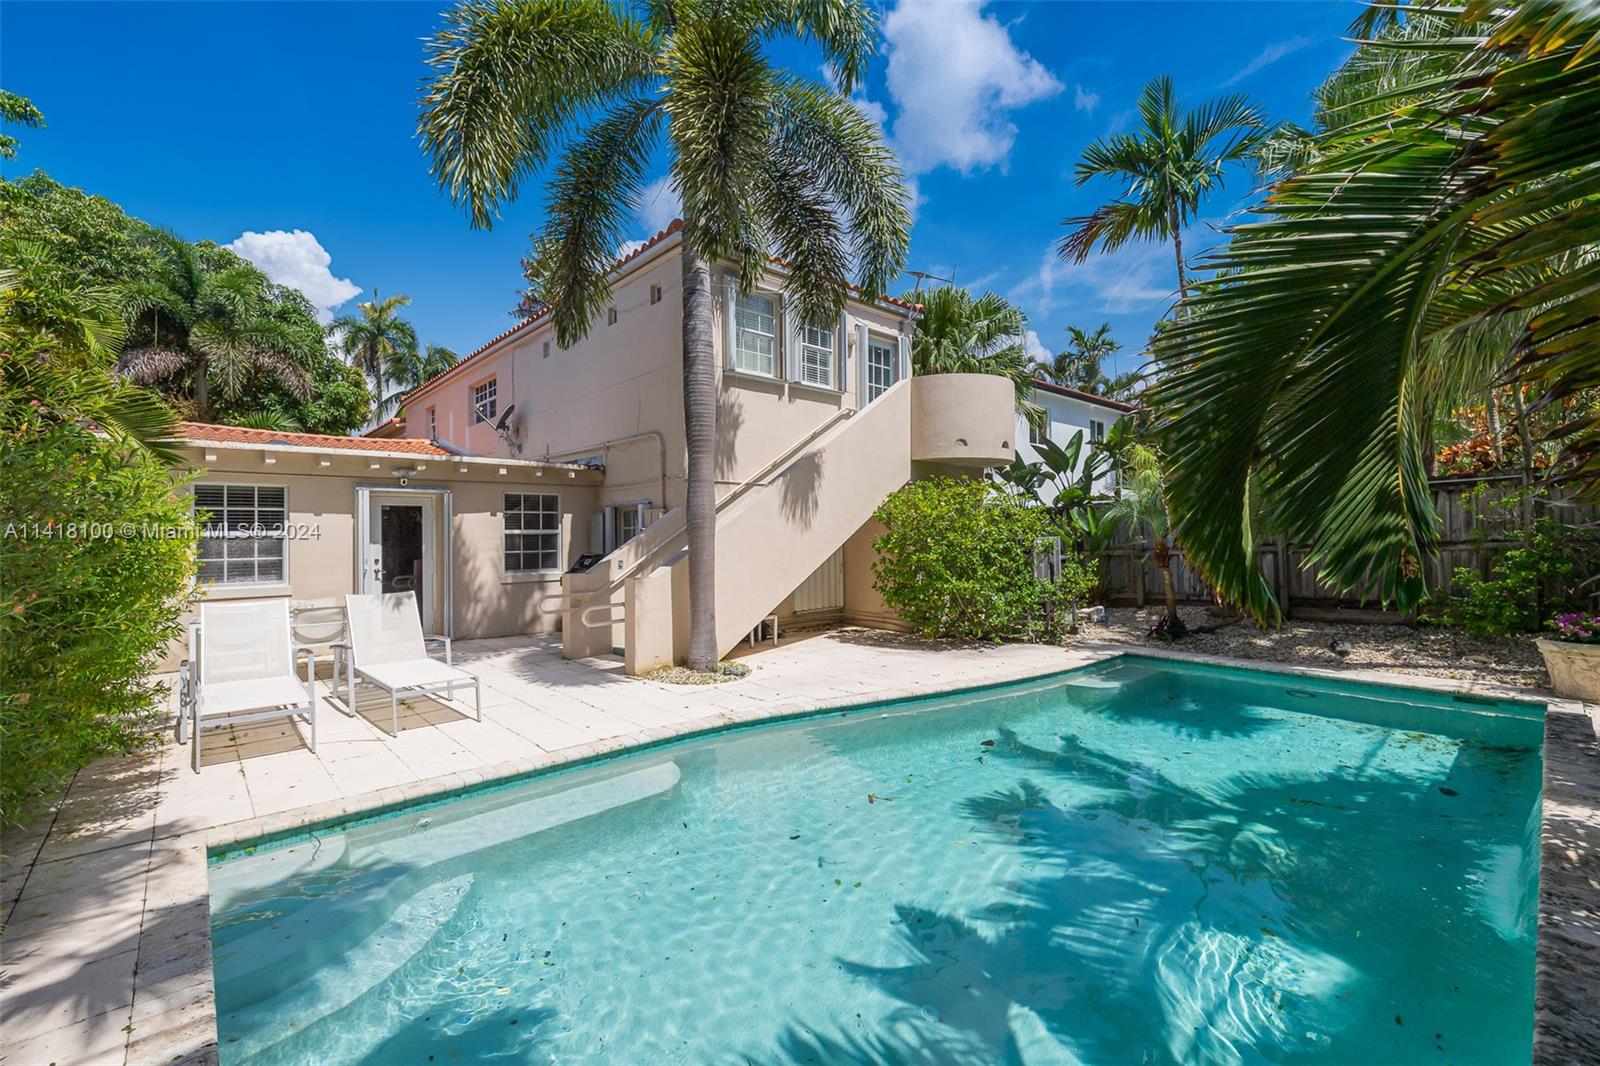 This spacious updated Miami Beach home with historic charm has 3,305 Sqft. under air. Enter through a tranquil butterfly garden & feel right at peace.  Sprawling floor plan with lots of natural light with skylights has four bedrooms and four bathrooms. Vaulted ceilings with exposed original beams centered around a beautiful fireplace in the large formal dining room. Remodeled eat in kitchen with island. The private owners suite with renovated ensuite has an attached bonus room area with a private entrance. Ample closet and storage space. Entertain in this private backyard oasis with a newly resurfaced pool. Multiple zone, energy efficient A/C systems. Never lose power. Full home natural gas generator. Tesla charging station. Minutes to all that Miami Beach has to offer.